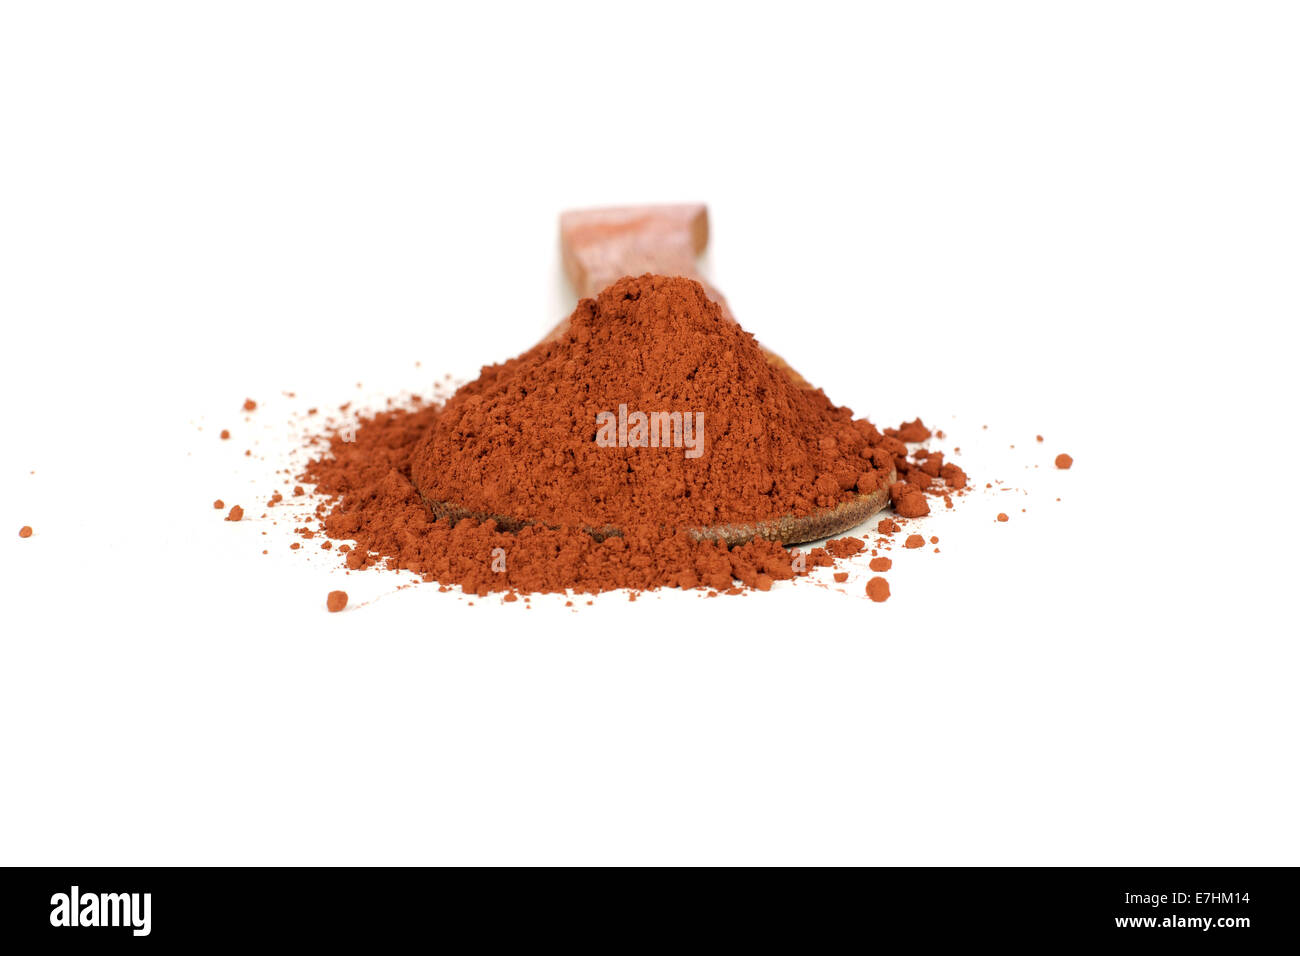 Spoon with cocoa powder isolated over white background Stock Photo